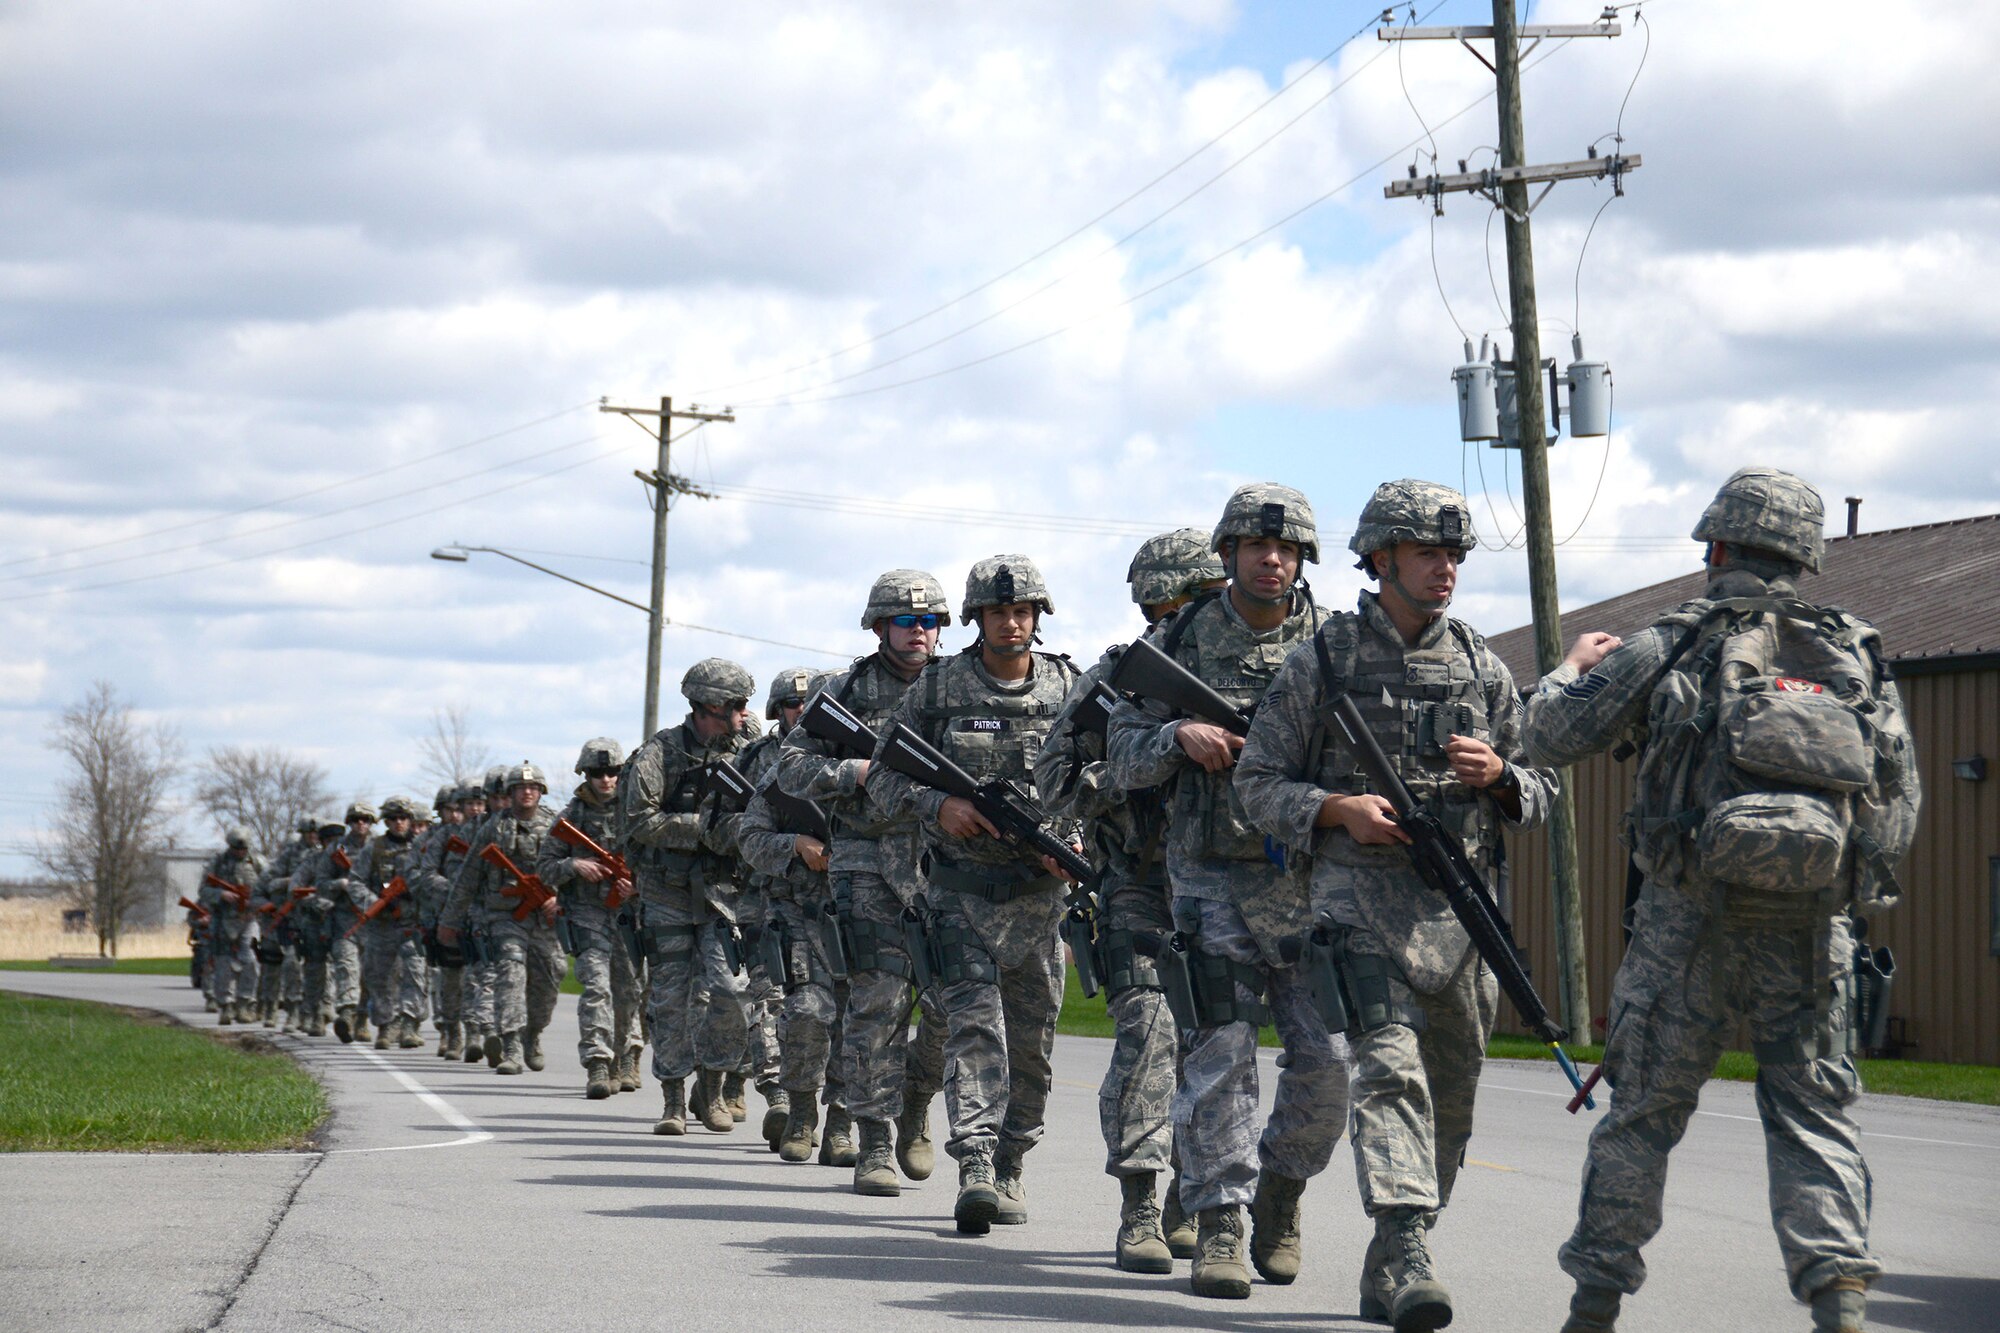 Airmen of the 914th Airlift Wing's Security Forces Squadron participate in a three-mile ruck march during the May Unit Training Assembly, May 3, 2014 at the Niagara Falls Air Reserve Station, N.Y.  The Airmen, each carrying more than 50 pounds of gear, complete morale marches like this quarterly.  (U.S. Air Force photo by Tech. Sgt. Andrew Caya)